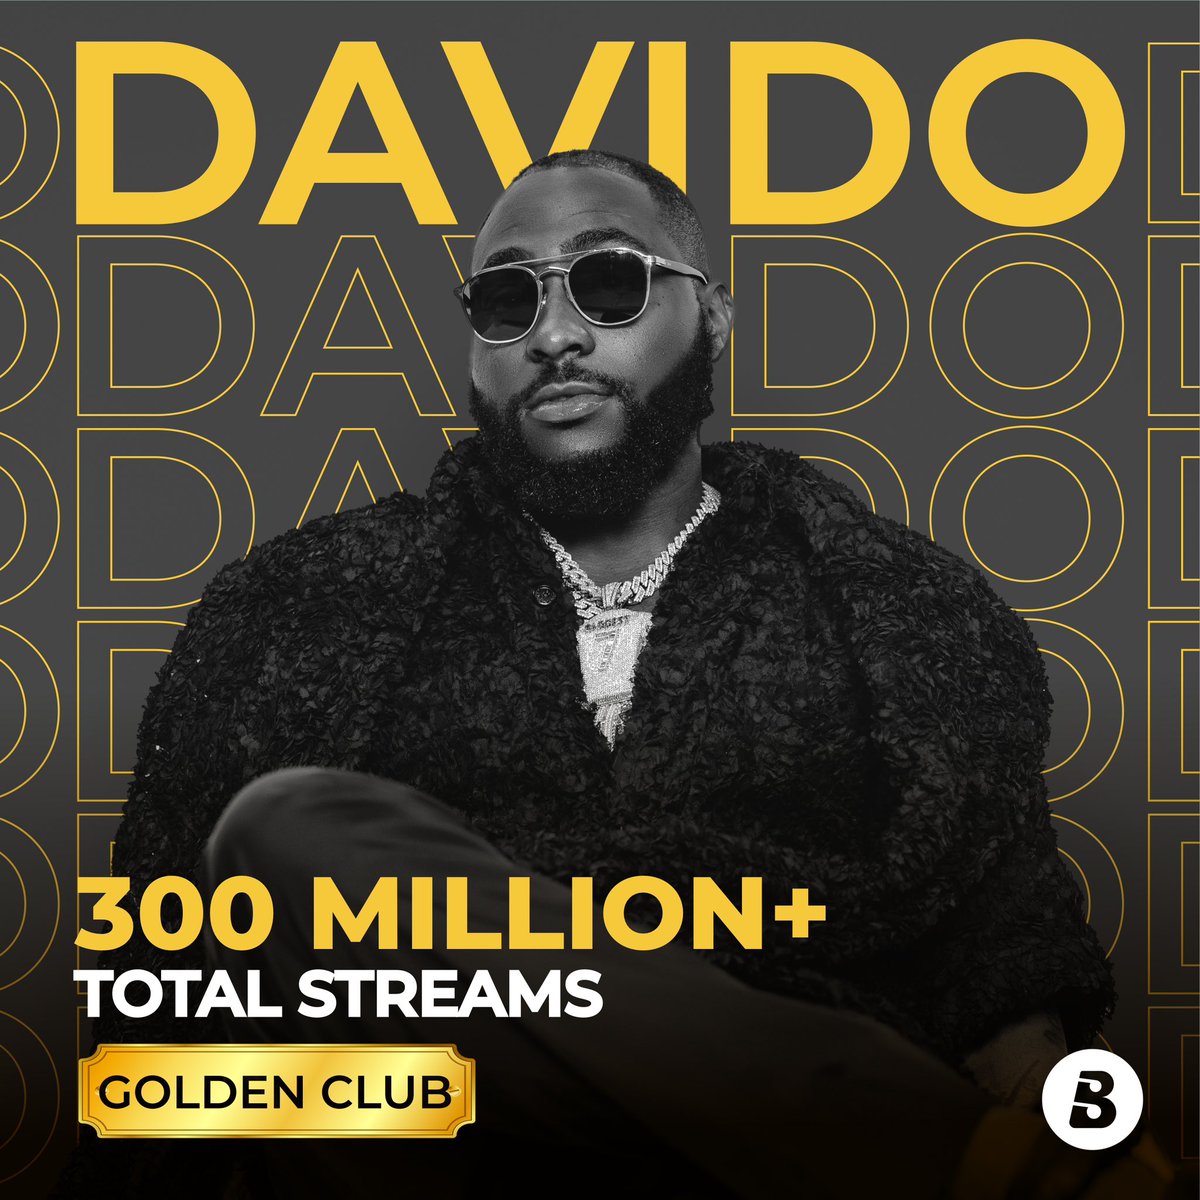 A Timeless Legend! 👑 Big Congratulations to OBO @davido as he hits 300,000,000 total streams on Boomplay. 🏆

Celebrate this feat by streaming the #TimelessAlbum here! 👉🏾 boom.lnk.to/DavidoTimeless

#BoomplayGoldenClub